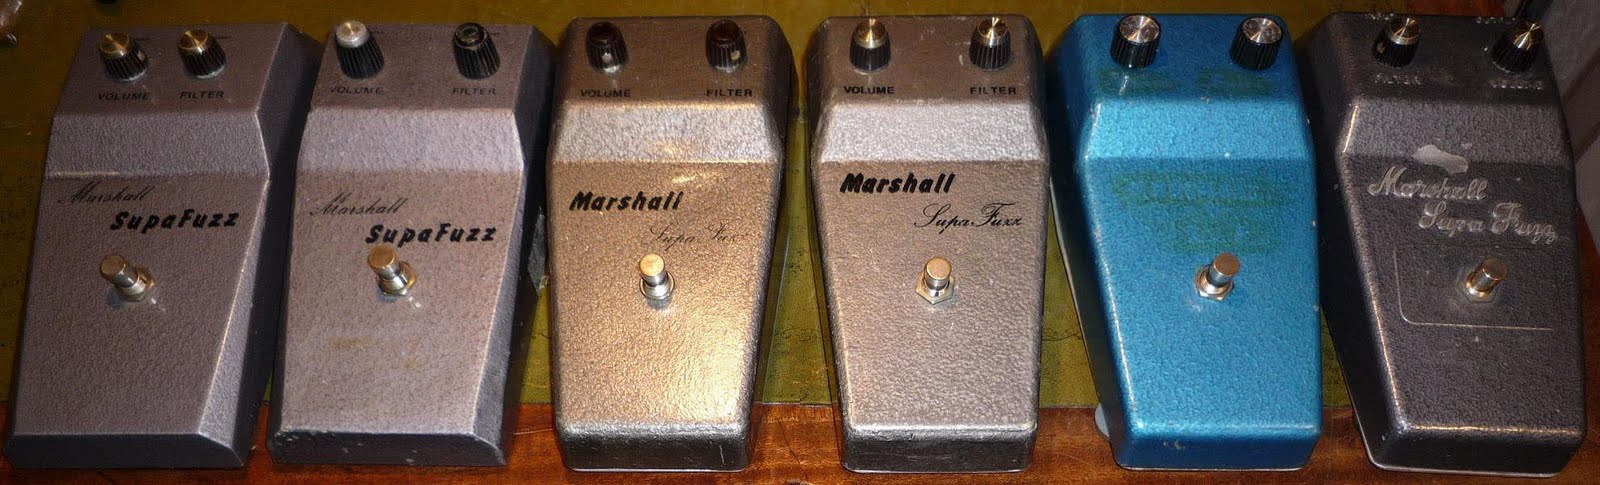 Buzz the Fuzz - all about Tone Bender: Marshall Supa Fuzz (1967-)